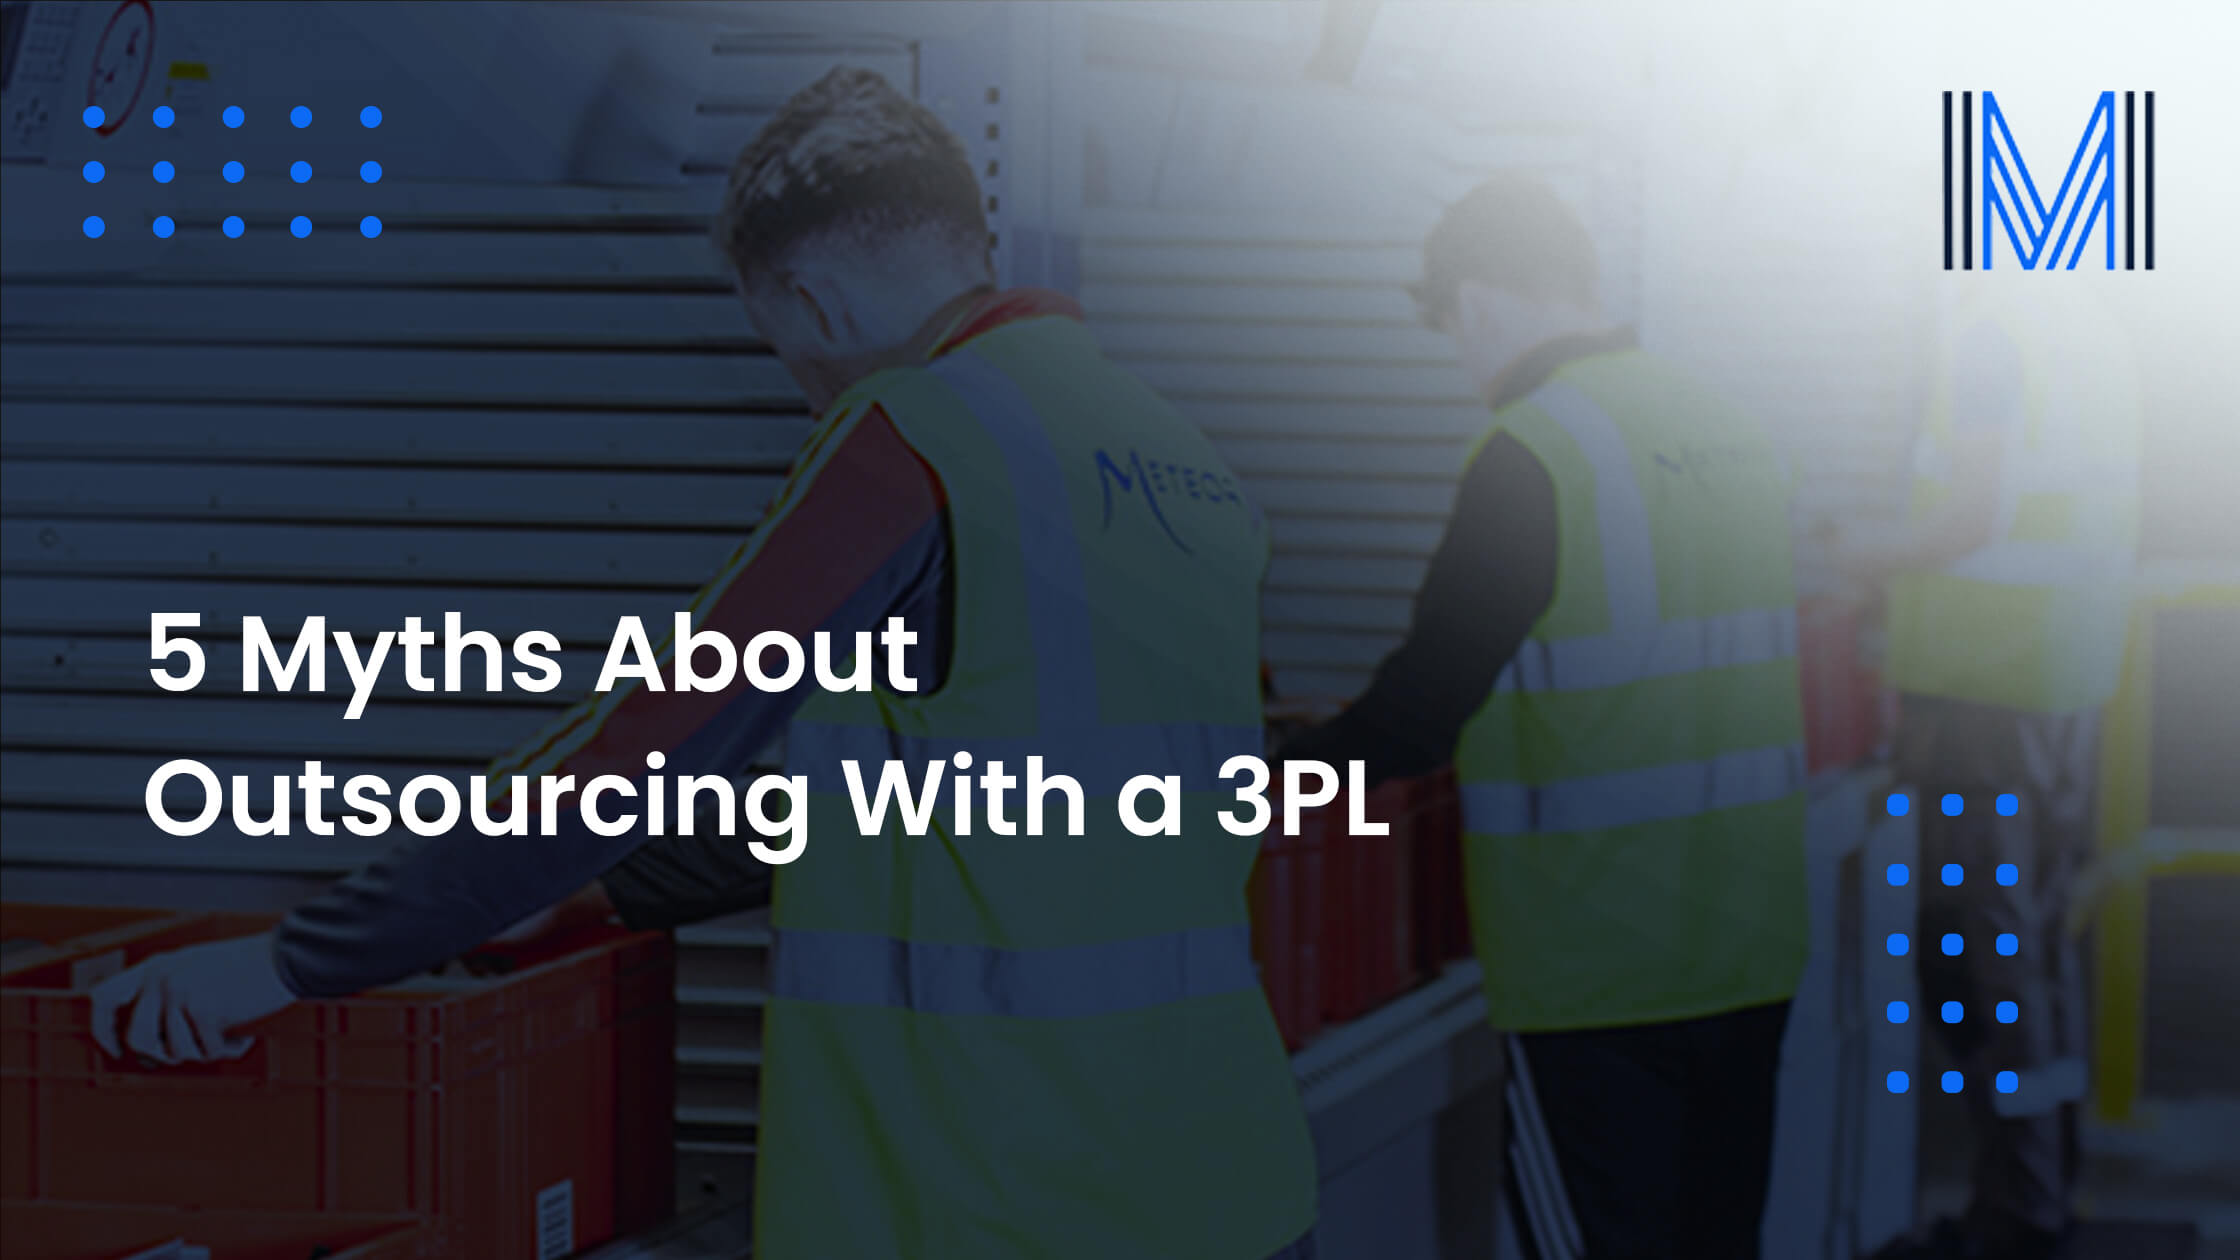 5 Myths About Outsourcing With a 3PL